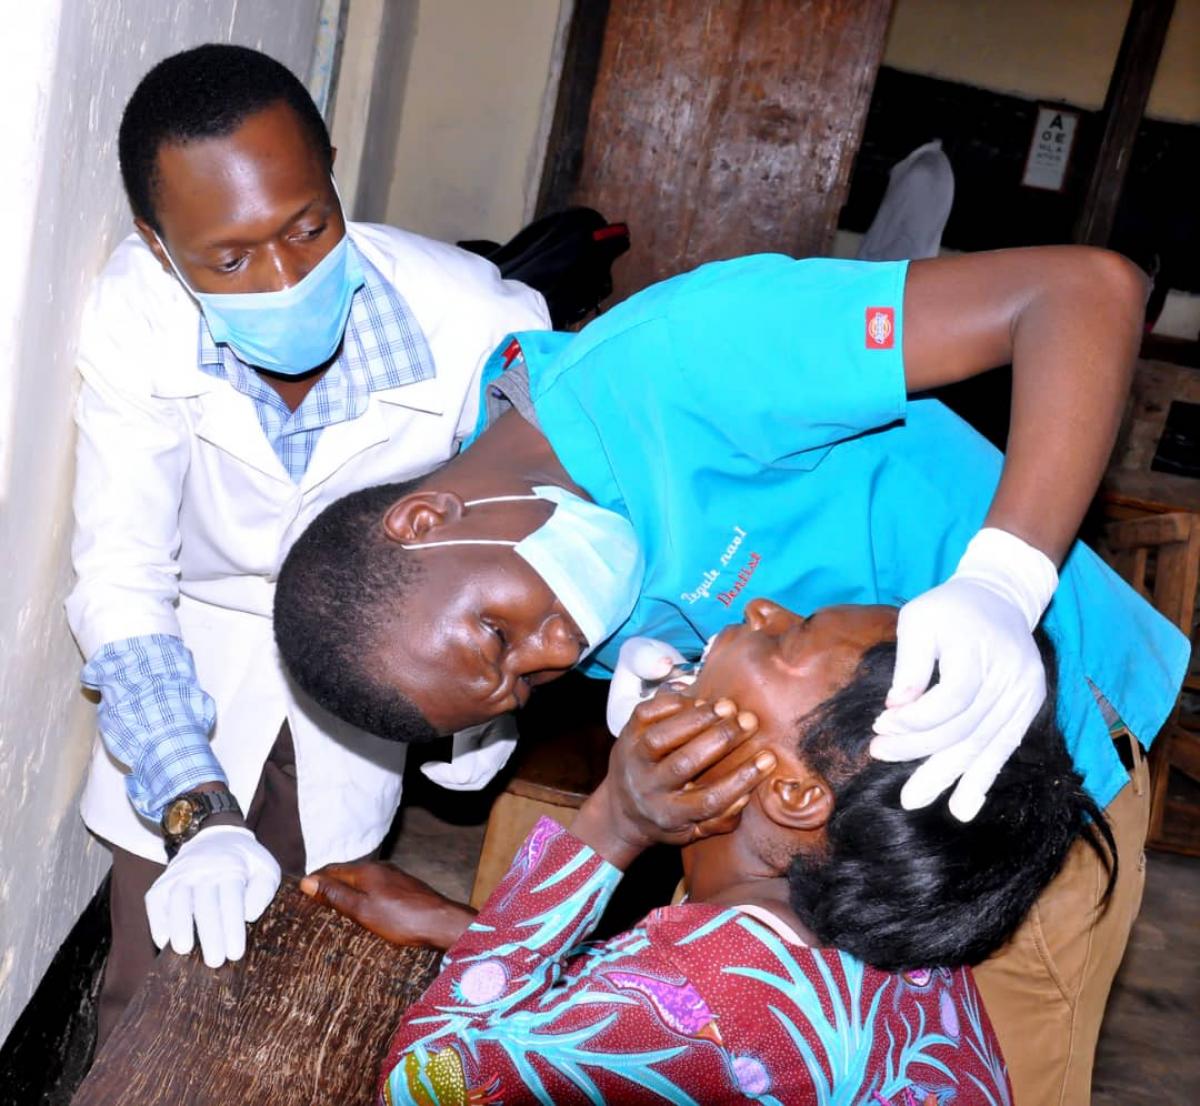 Rotary Clubs adopted a Ugandan Village - Allows people to access a dentist